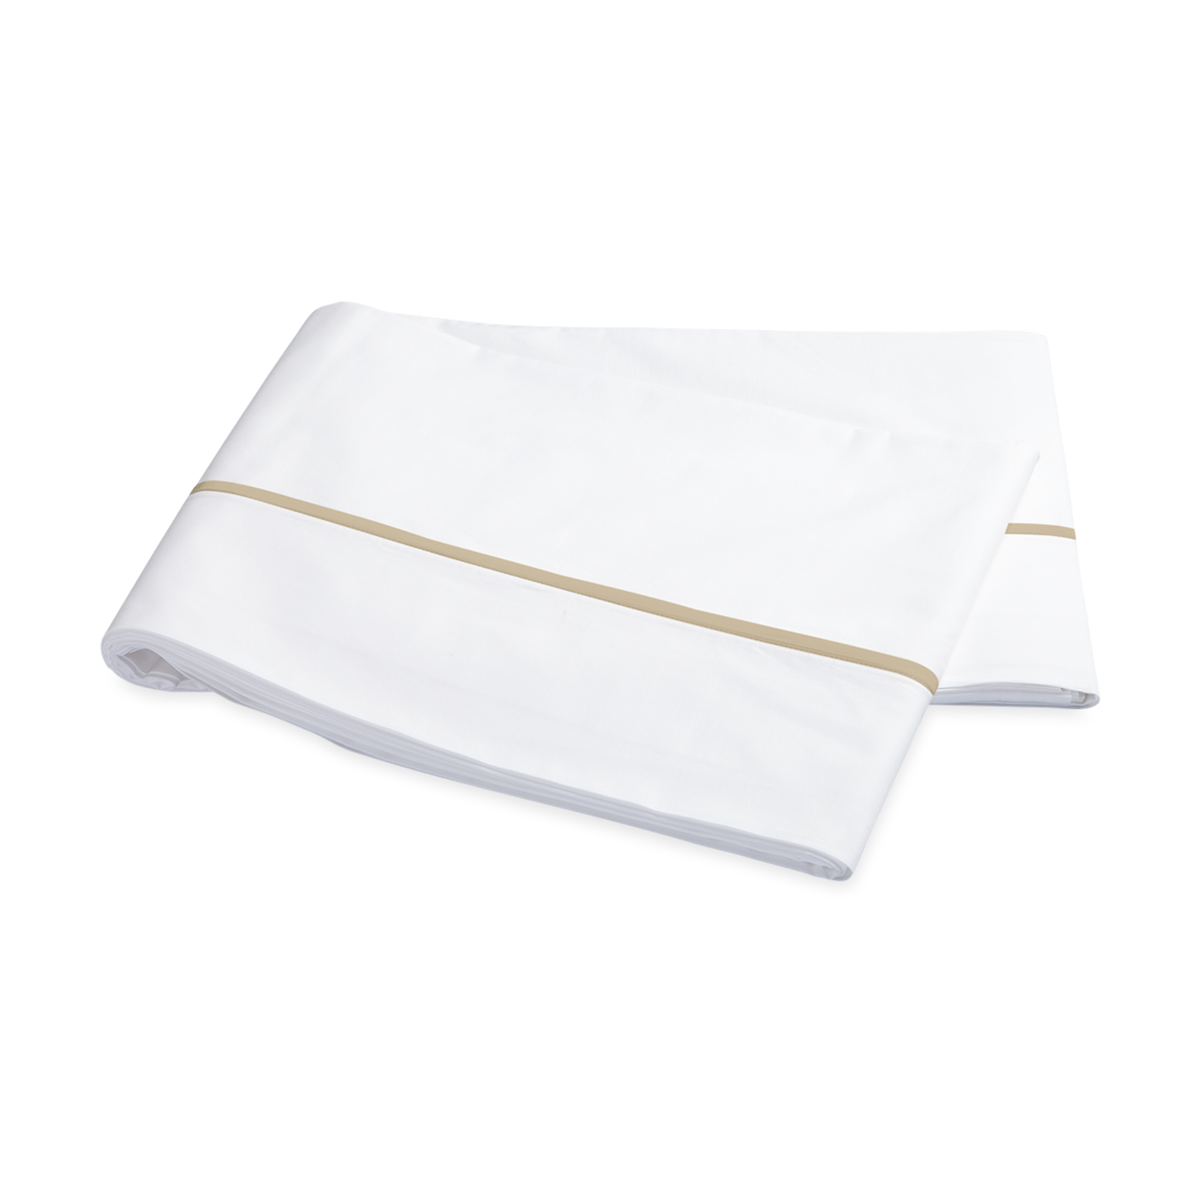 Flat Sheets of Matouk Gatsby Bedding Champagne Color